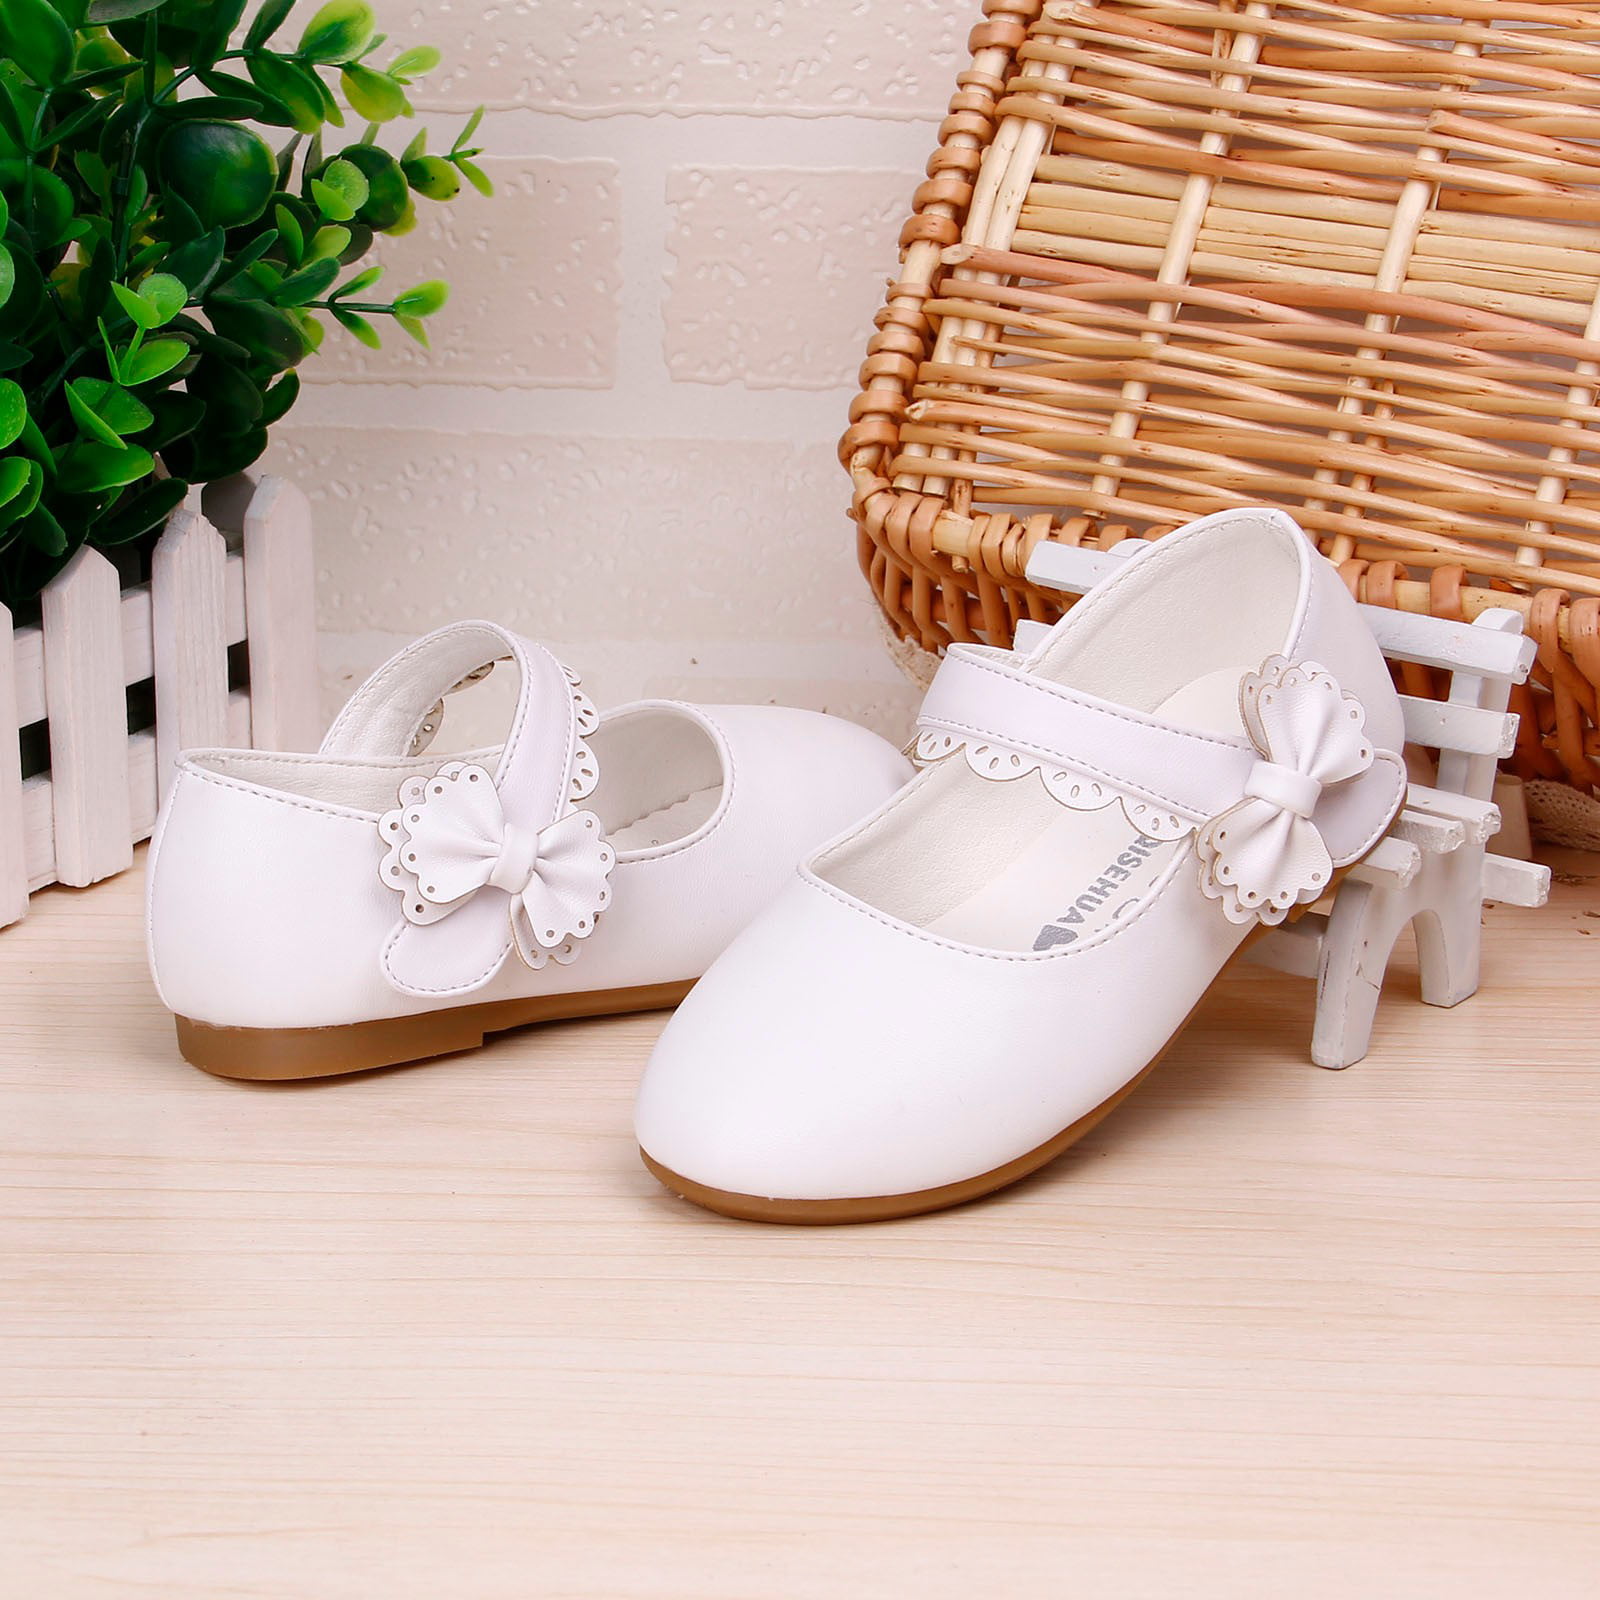 Luxury Leather Princess Toddler Shoes For Girls Soft Bottom From  Dear_kids2019, $15.03